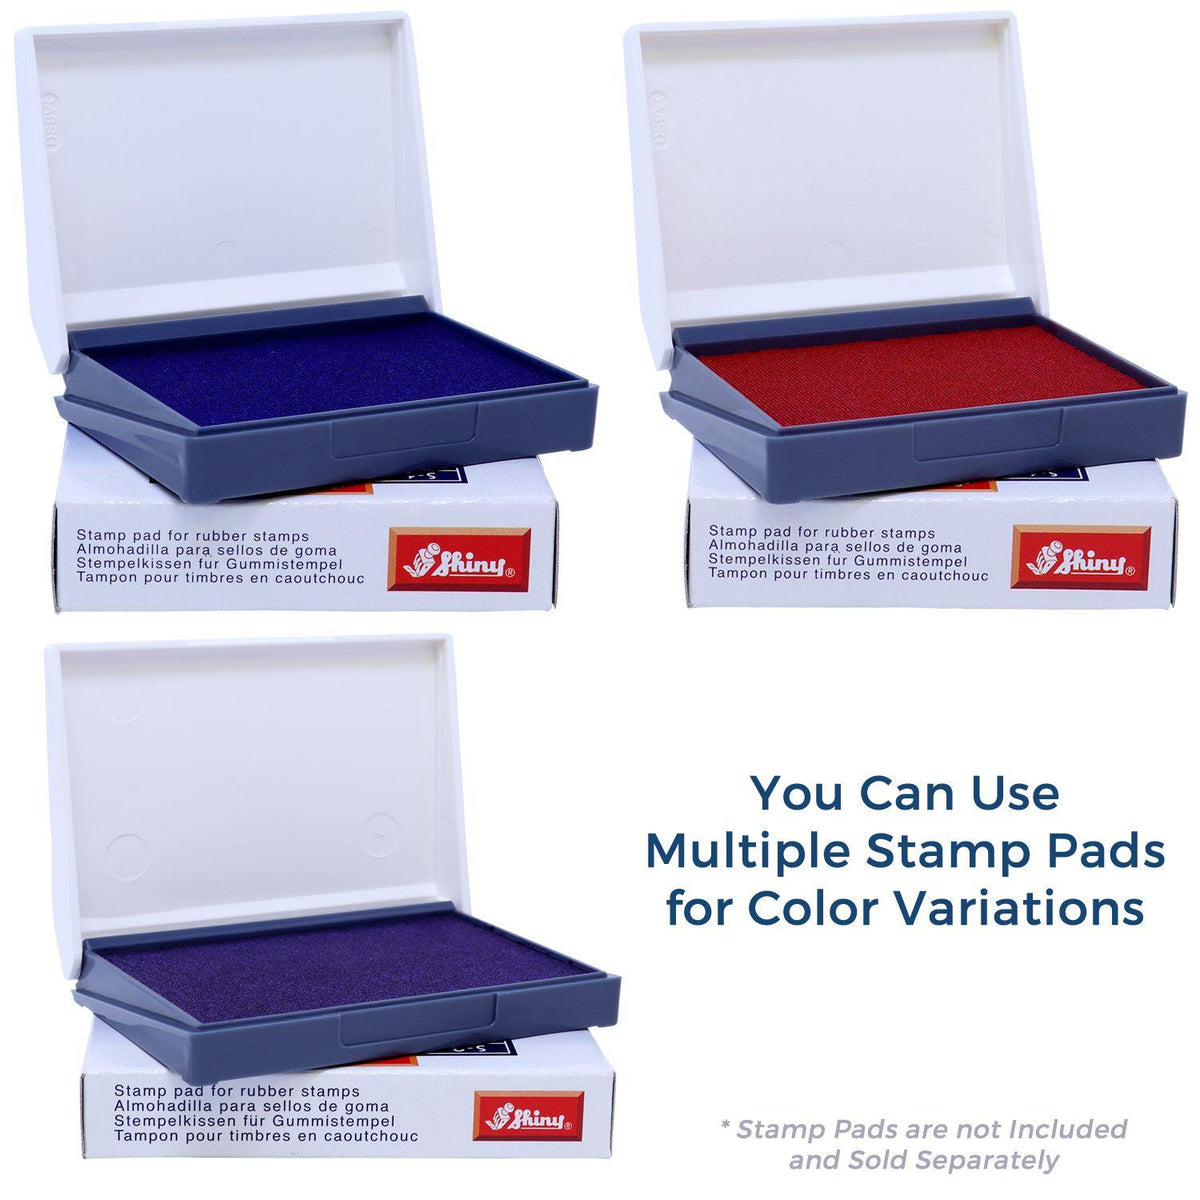 Stamp Pads for Trust Rubber Stamp Available